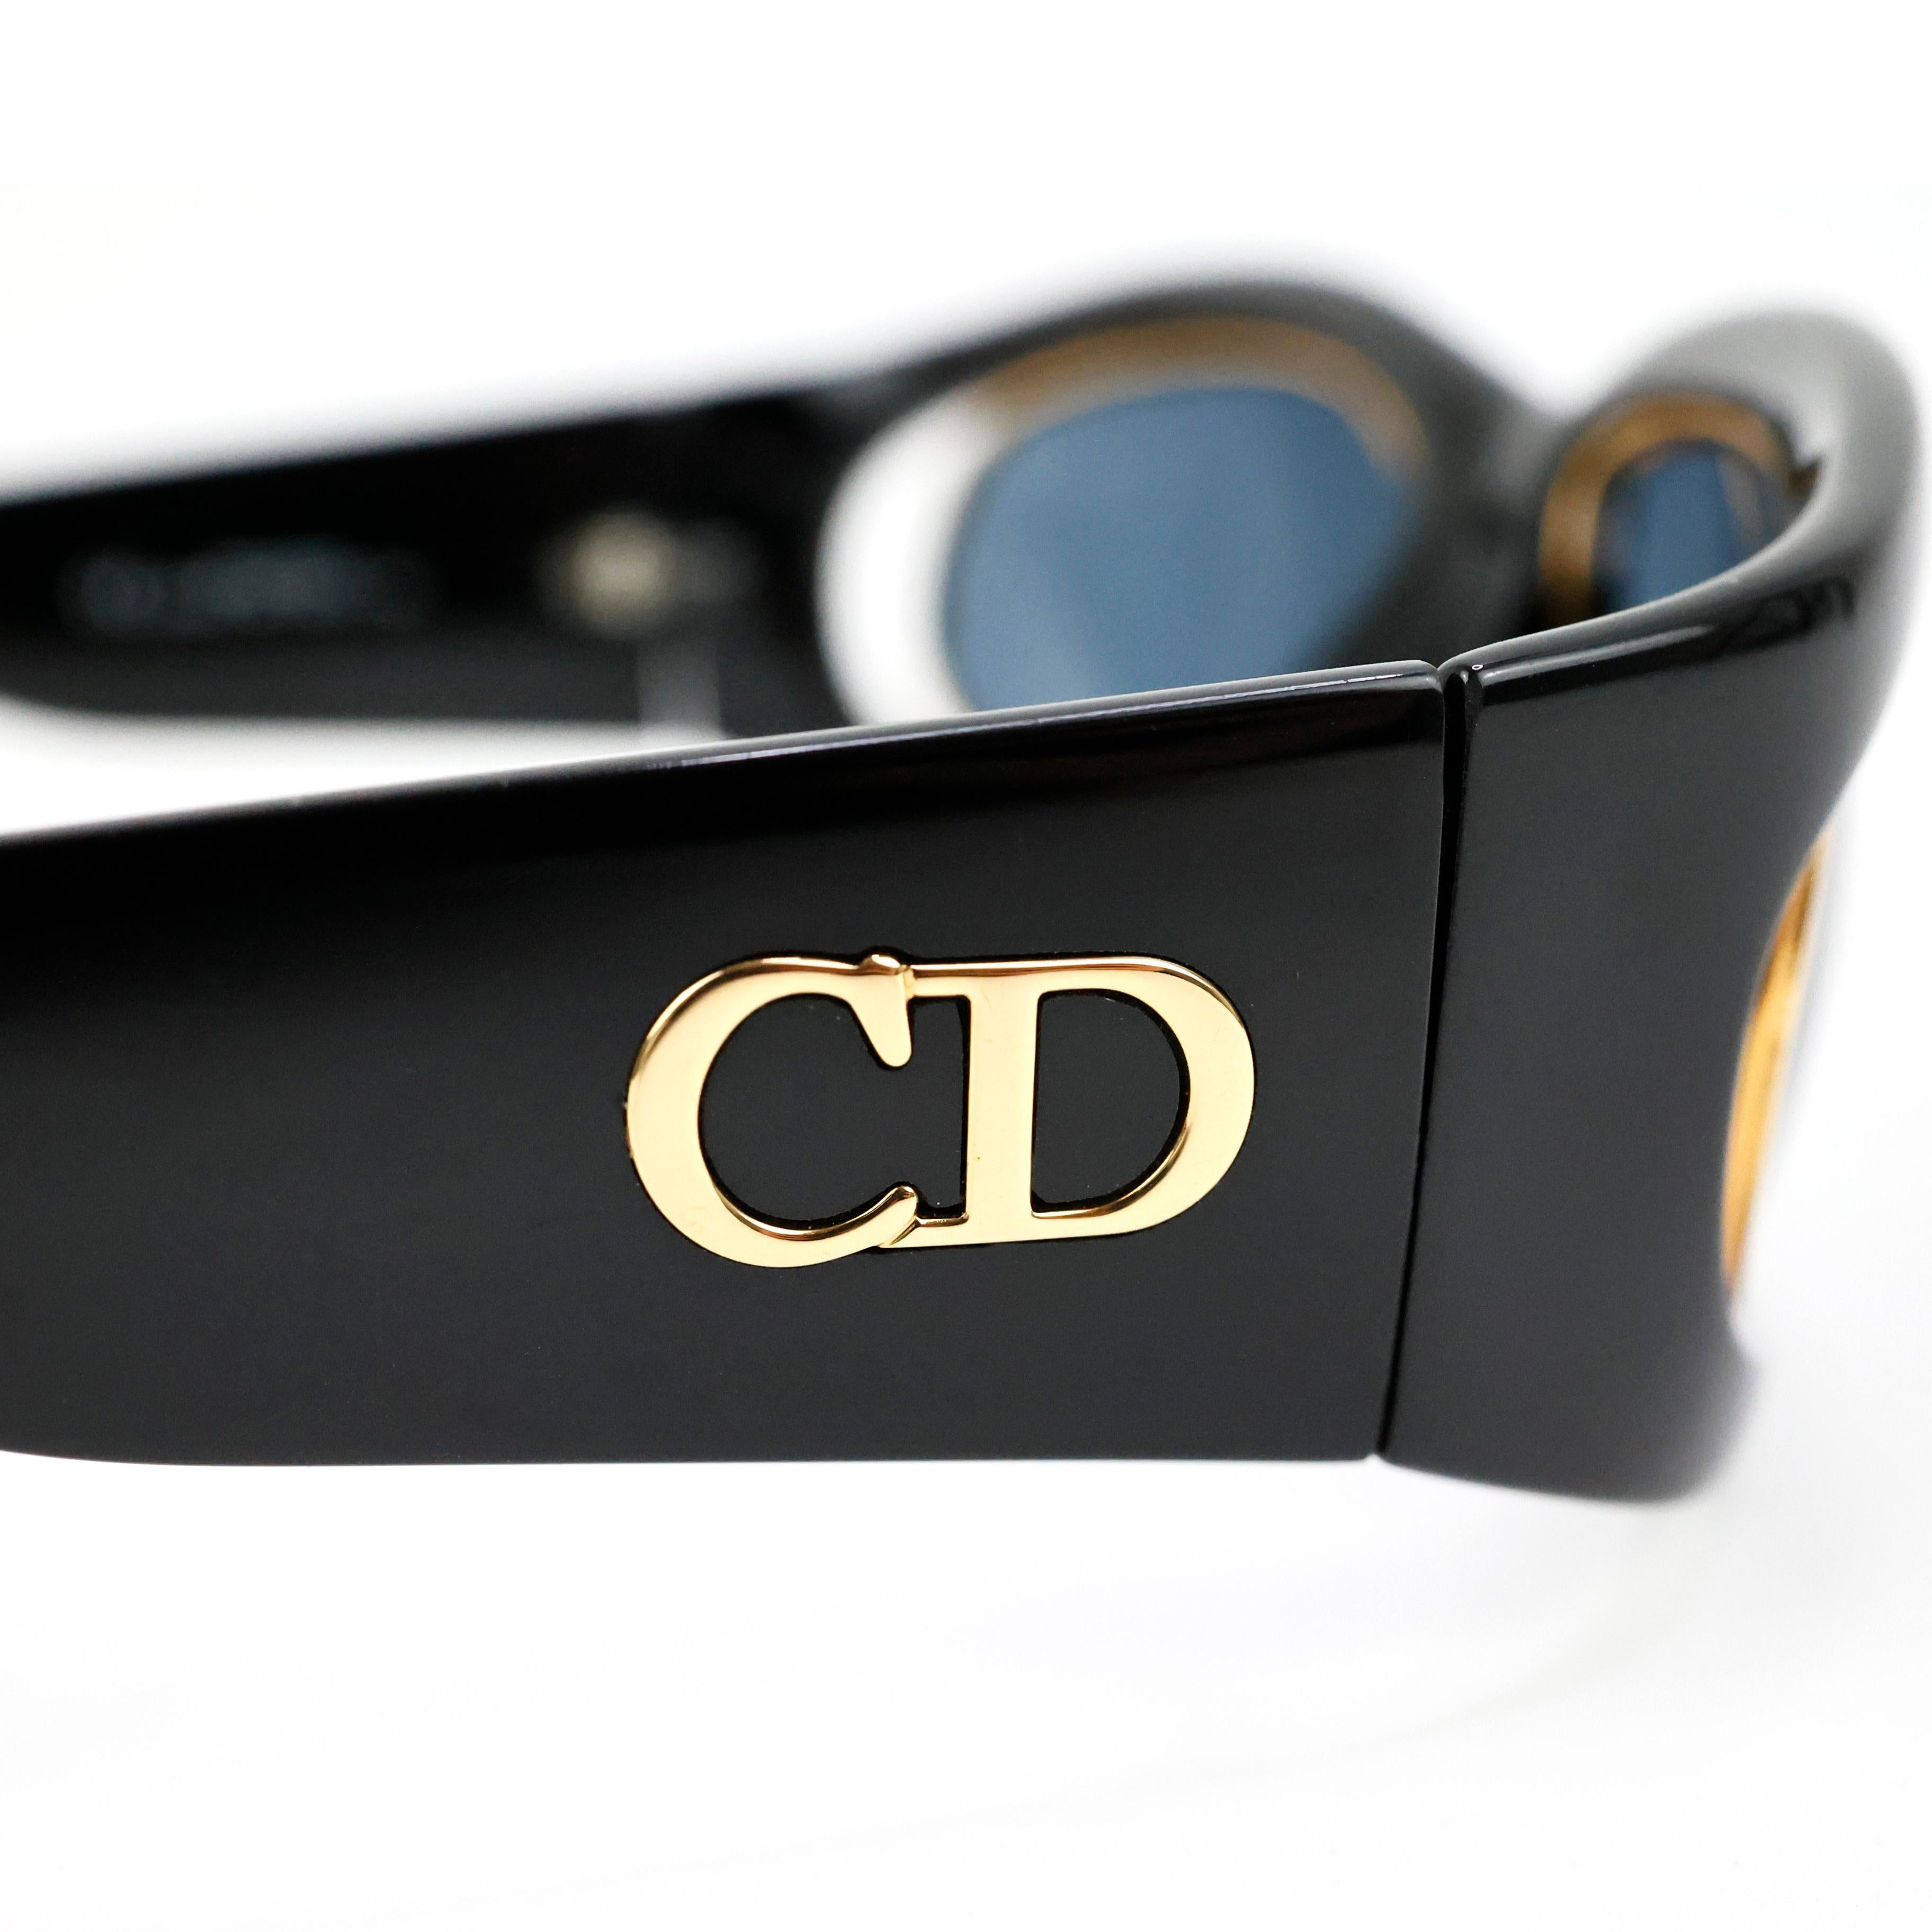 Dior Sunglasses mod. CD2040 Black and Gold In Excellent Condition For Sale In Bressanone, IT